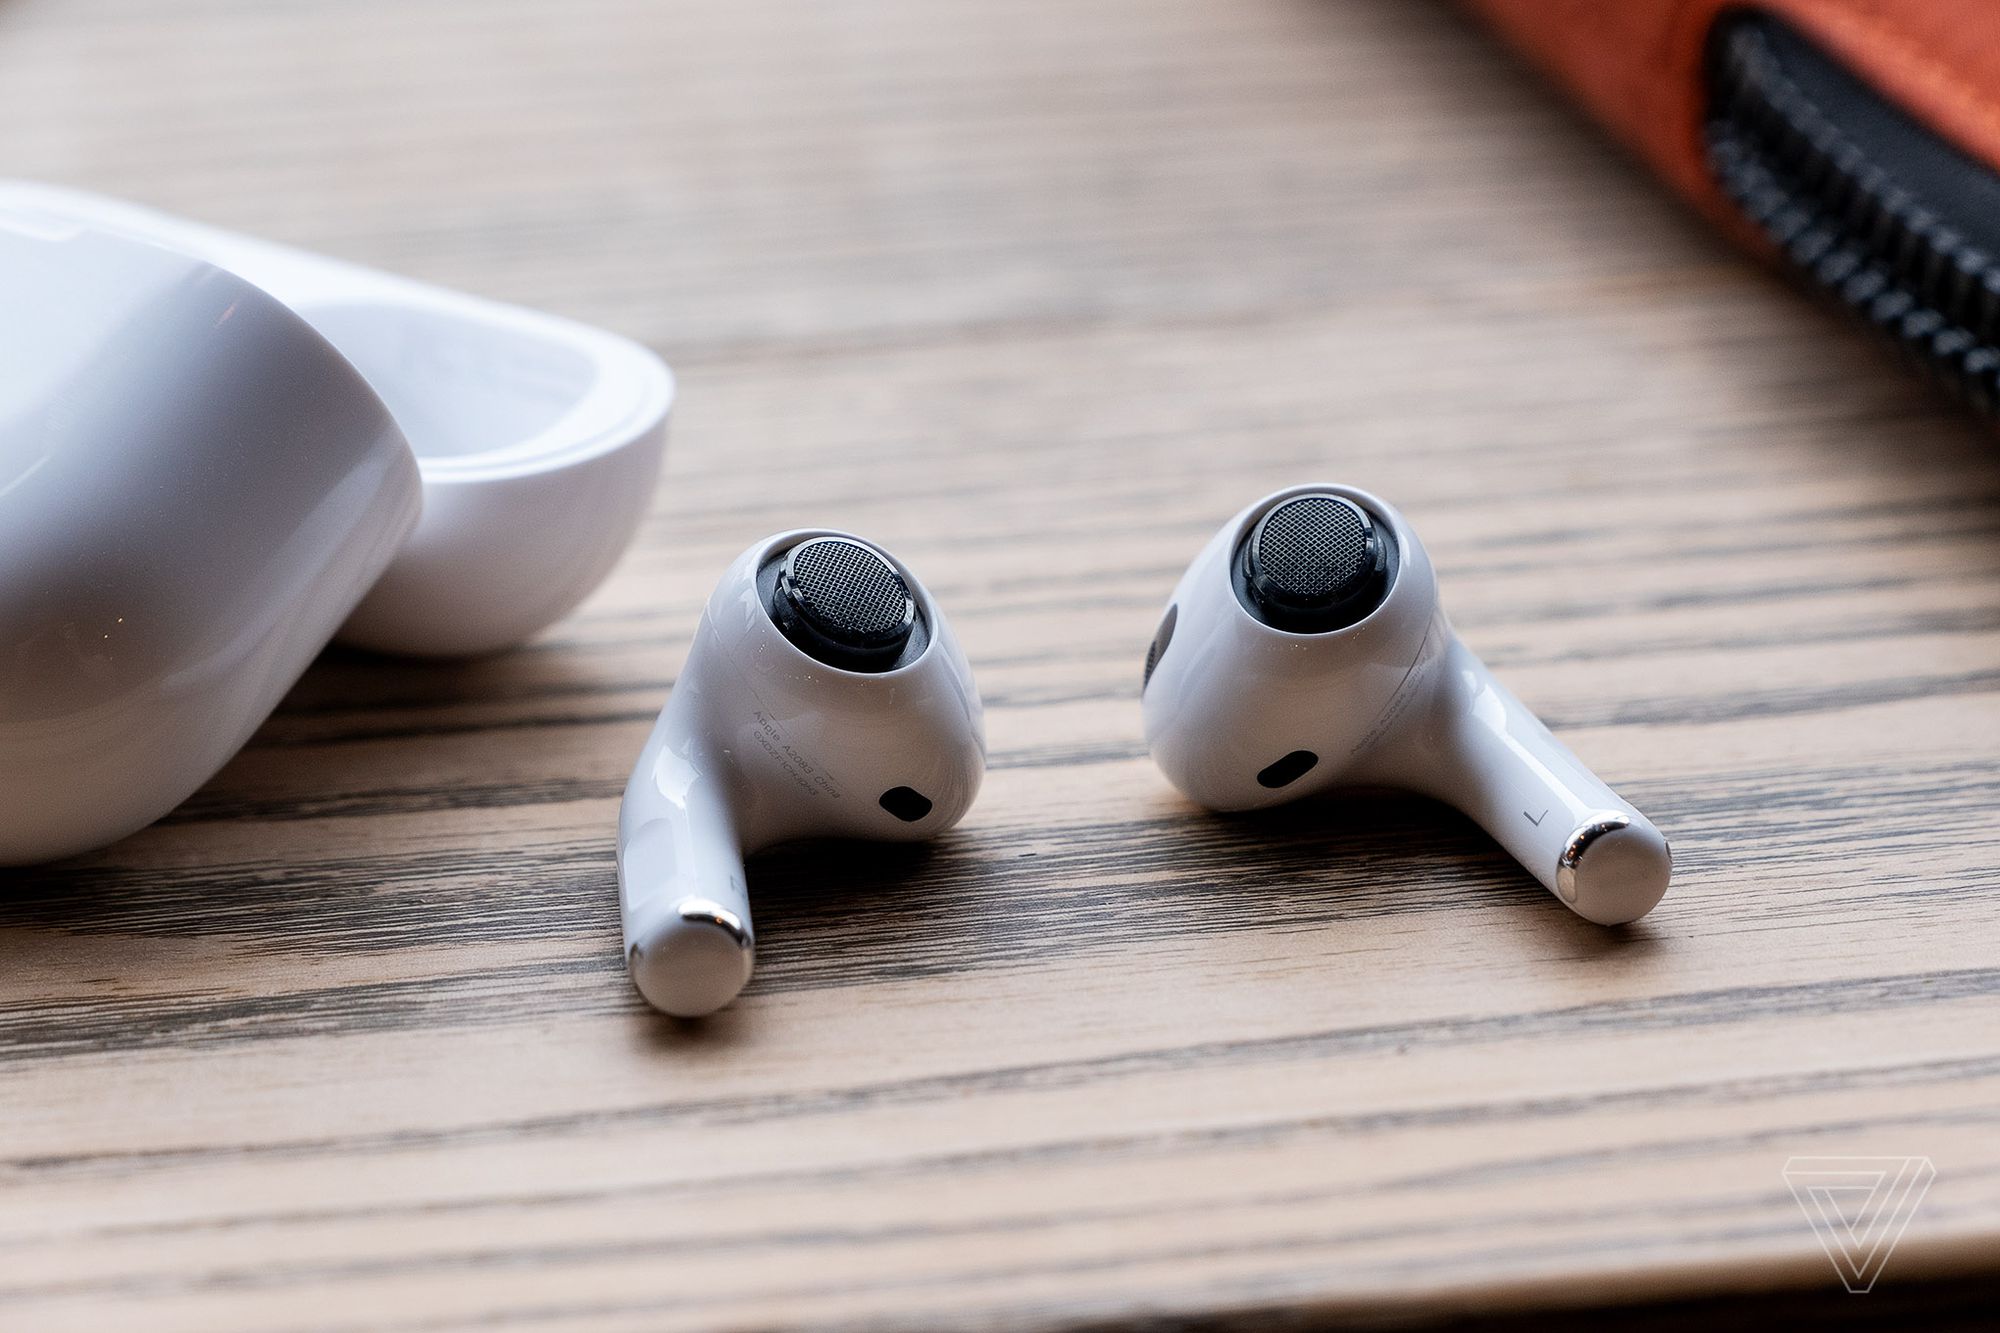 Macadam Of God Boil AirPods Pro owners complain of worse noise cancellation after firmware  updates - The Verge